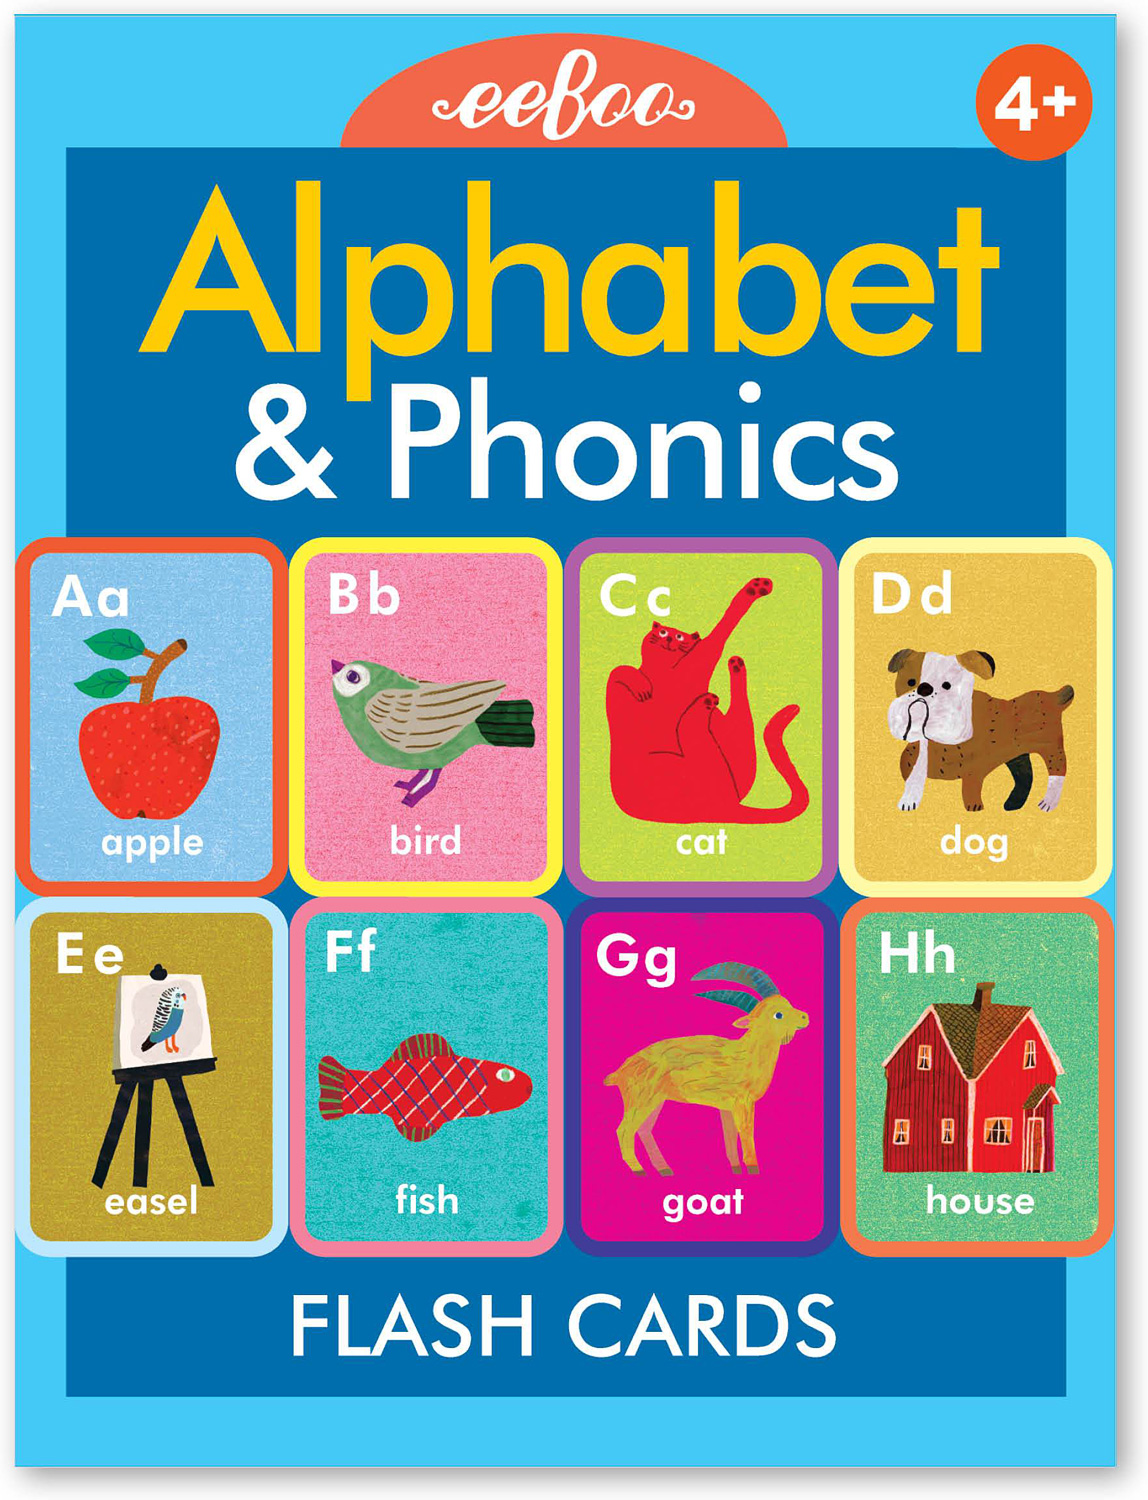 Phonics Cards with Pictures